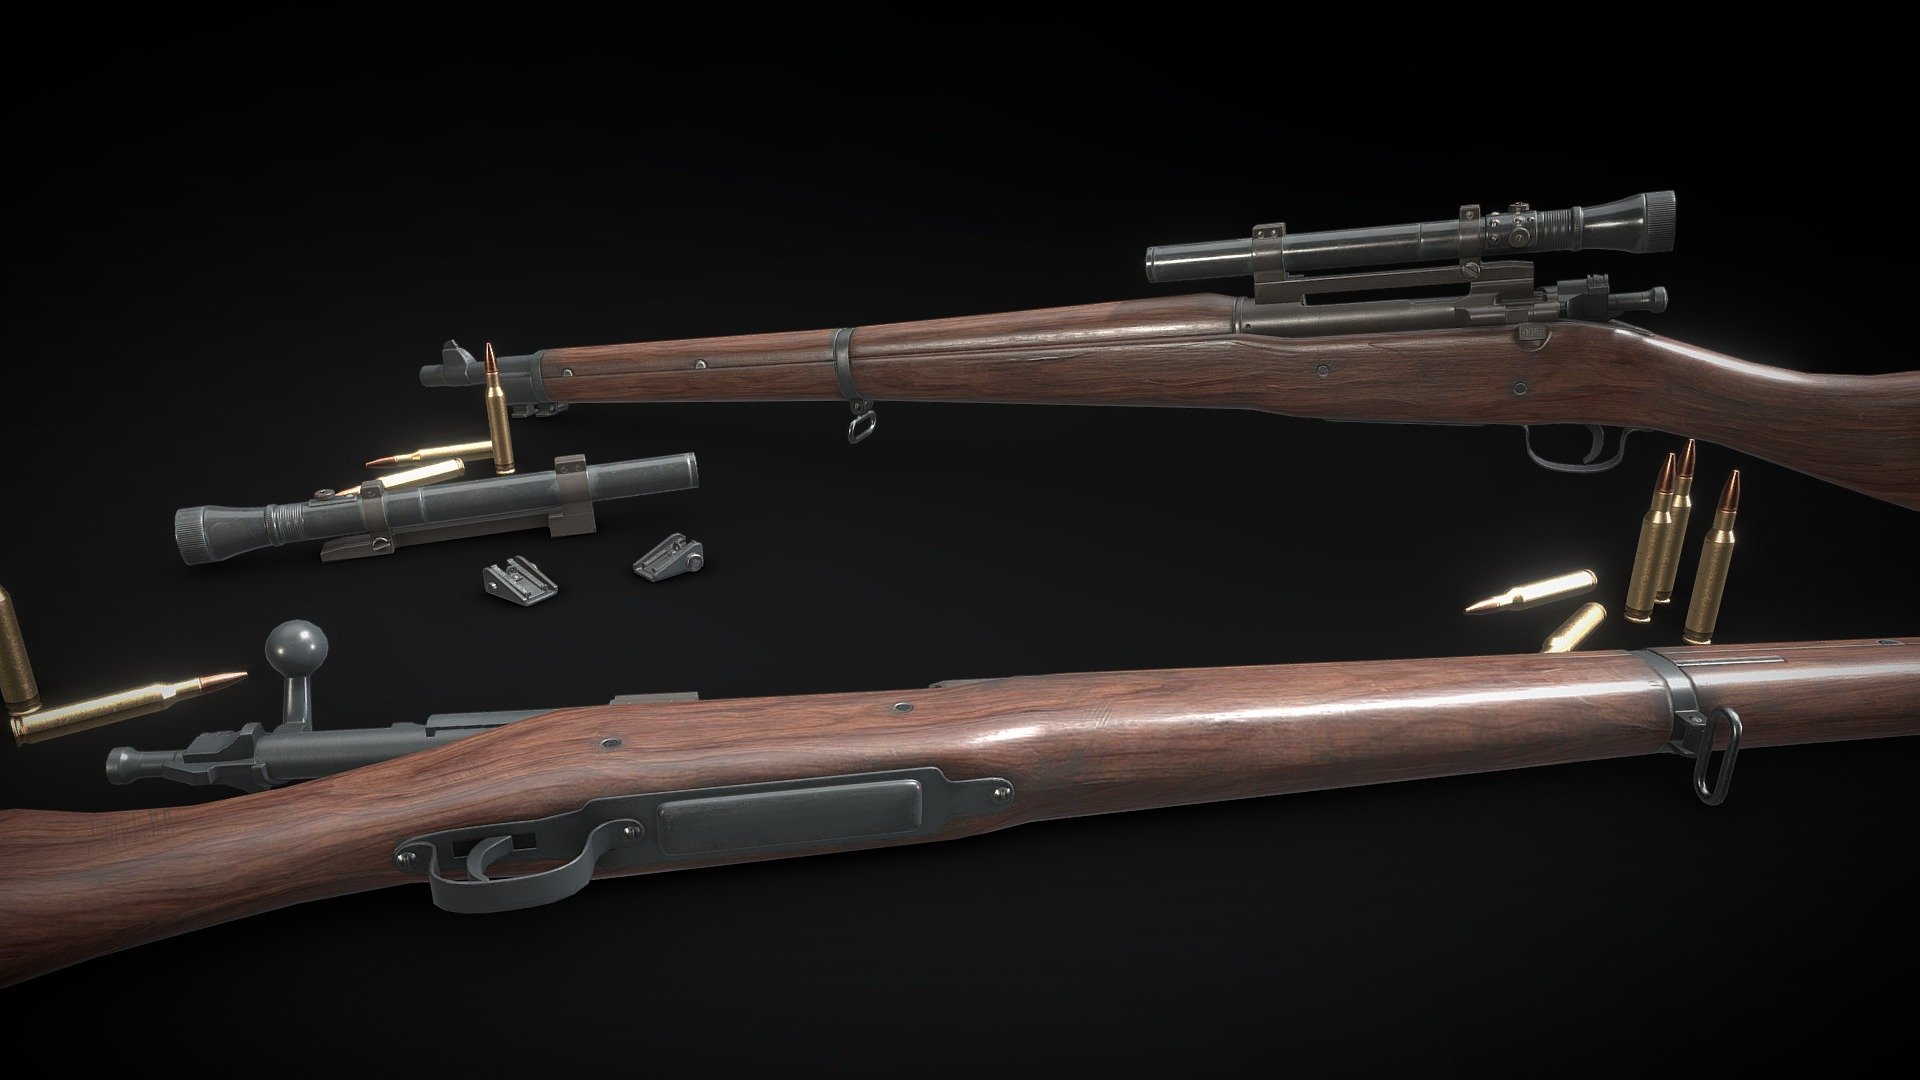 Springfield 1903 or M 1903 is bolt-action rifle use by U.S army in WW1 and WW2. this game model purposed for FPS but suitable for TPS and other project.
Model information :




available format : FBX, obj , and blend

Blend format already rigged (rifle+scope)

FBX and obj already in separated part for rigging

rifle (6,48cm X 111cm x 20,40cm) (3339 verts, 6095 Tris)

scope (2,99cm X 26 cm x 4,15cm) (1275 verts, 2264 Tris)

sight (2,58cm X 2,92cm x 1,44cm) (372 verts, 668 tris)

texture in png format

texture size: rifle(4096x4096), scope(2048x2948), sight(1024x1024)

Overlapping/mirror: bolt, trigger, and some part

pbr base(metal), cryengine, unreal engine, and unity texture in texture file /folder

note : notify me if you have issue with model 

TIP :
The model may appear more shiny in some render engine, tweak the roughness map for fix it. For best result (like in the image) set roughness to noncolourdata /uncheck Srgb in your render engine or increase the roughness by multiply it by 1,5 to 2 - Springfield 1903 sniper rifle - Buy Royalty Free 3D model by Michael Karel (@michaelkarel) 3d model